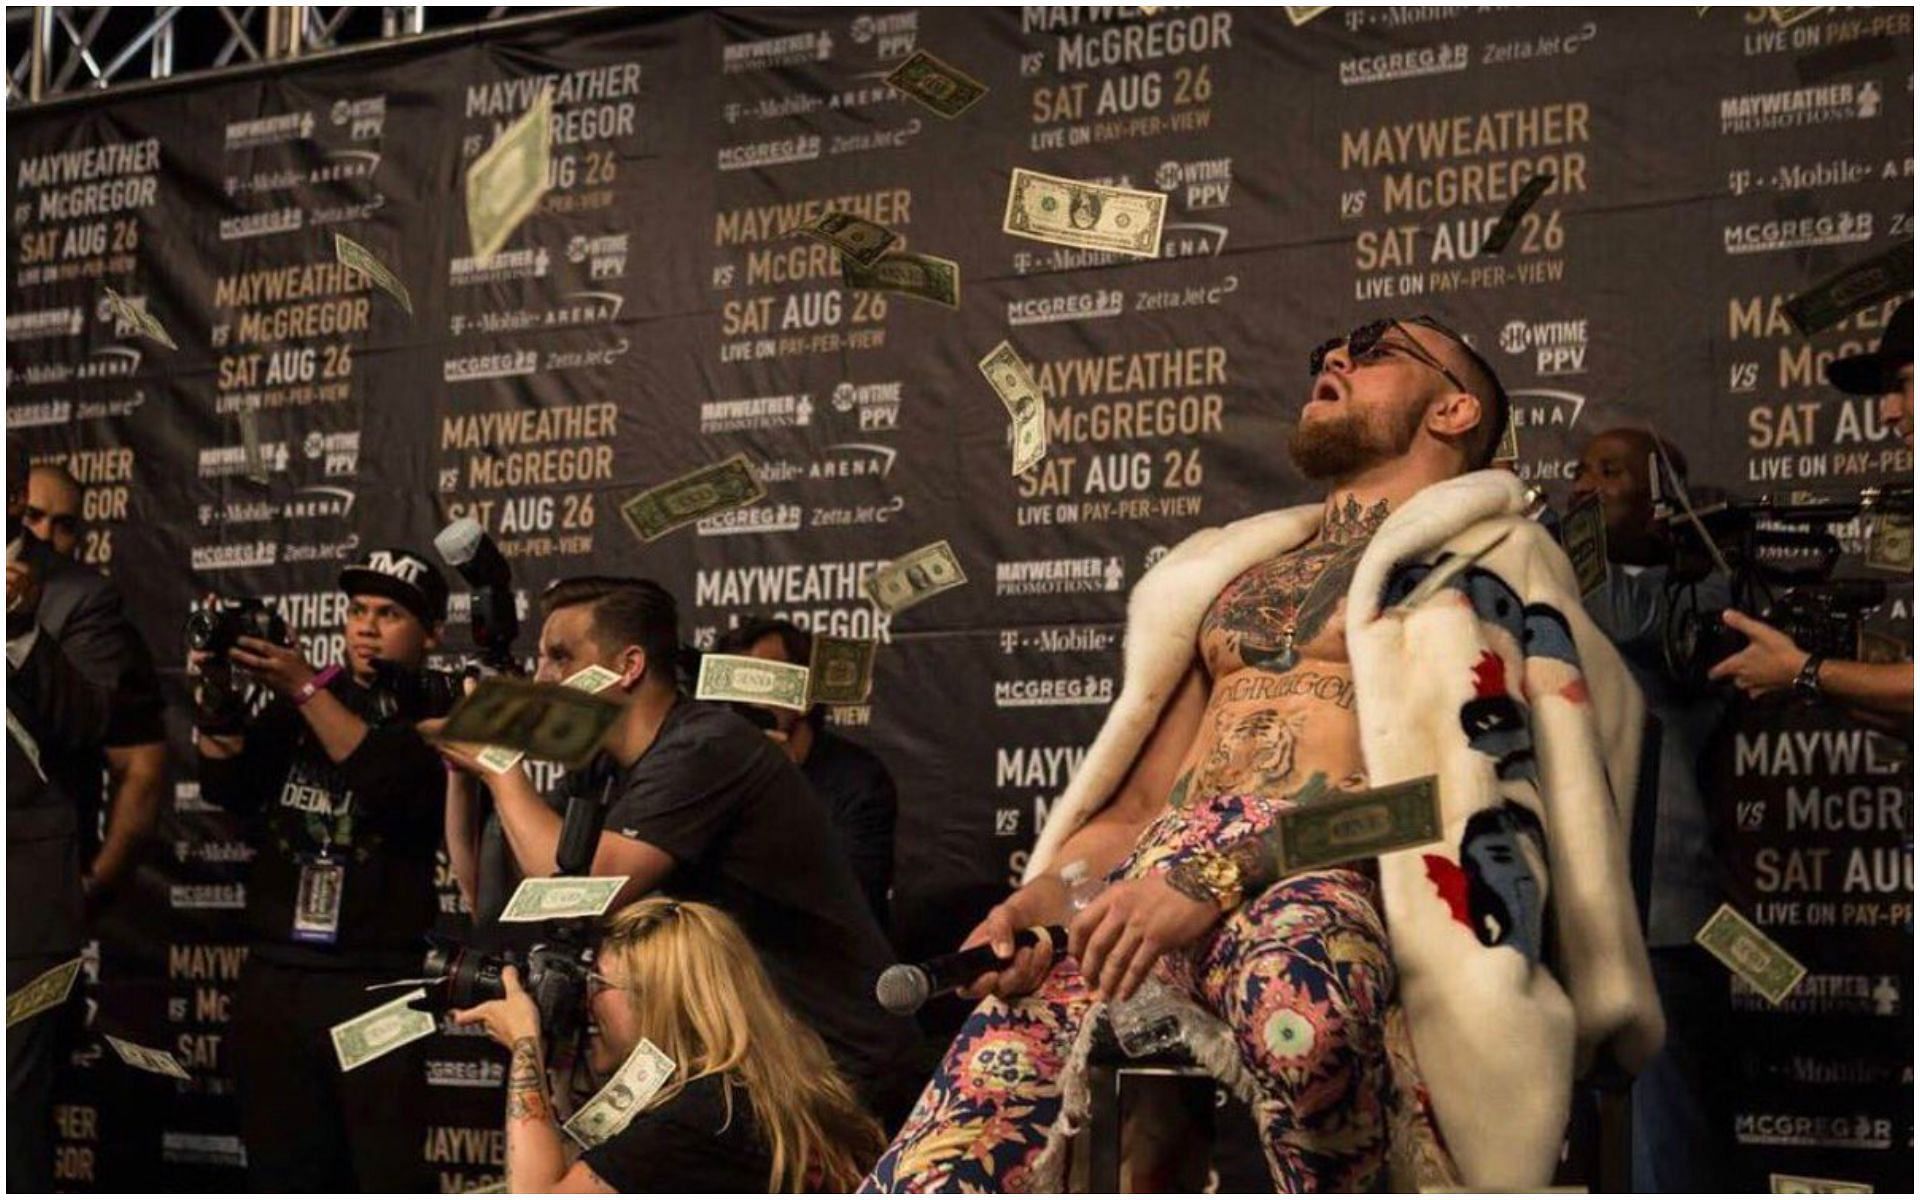 McGregor eyes more money fights as Mayweather retires - EgyptToday